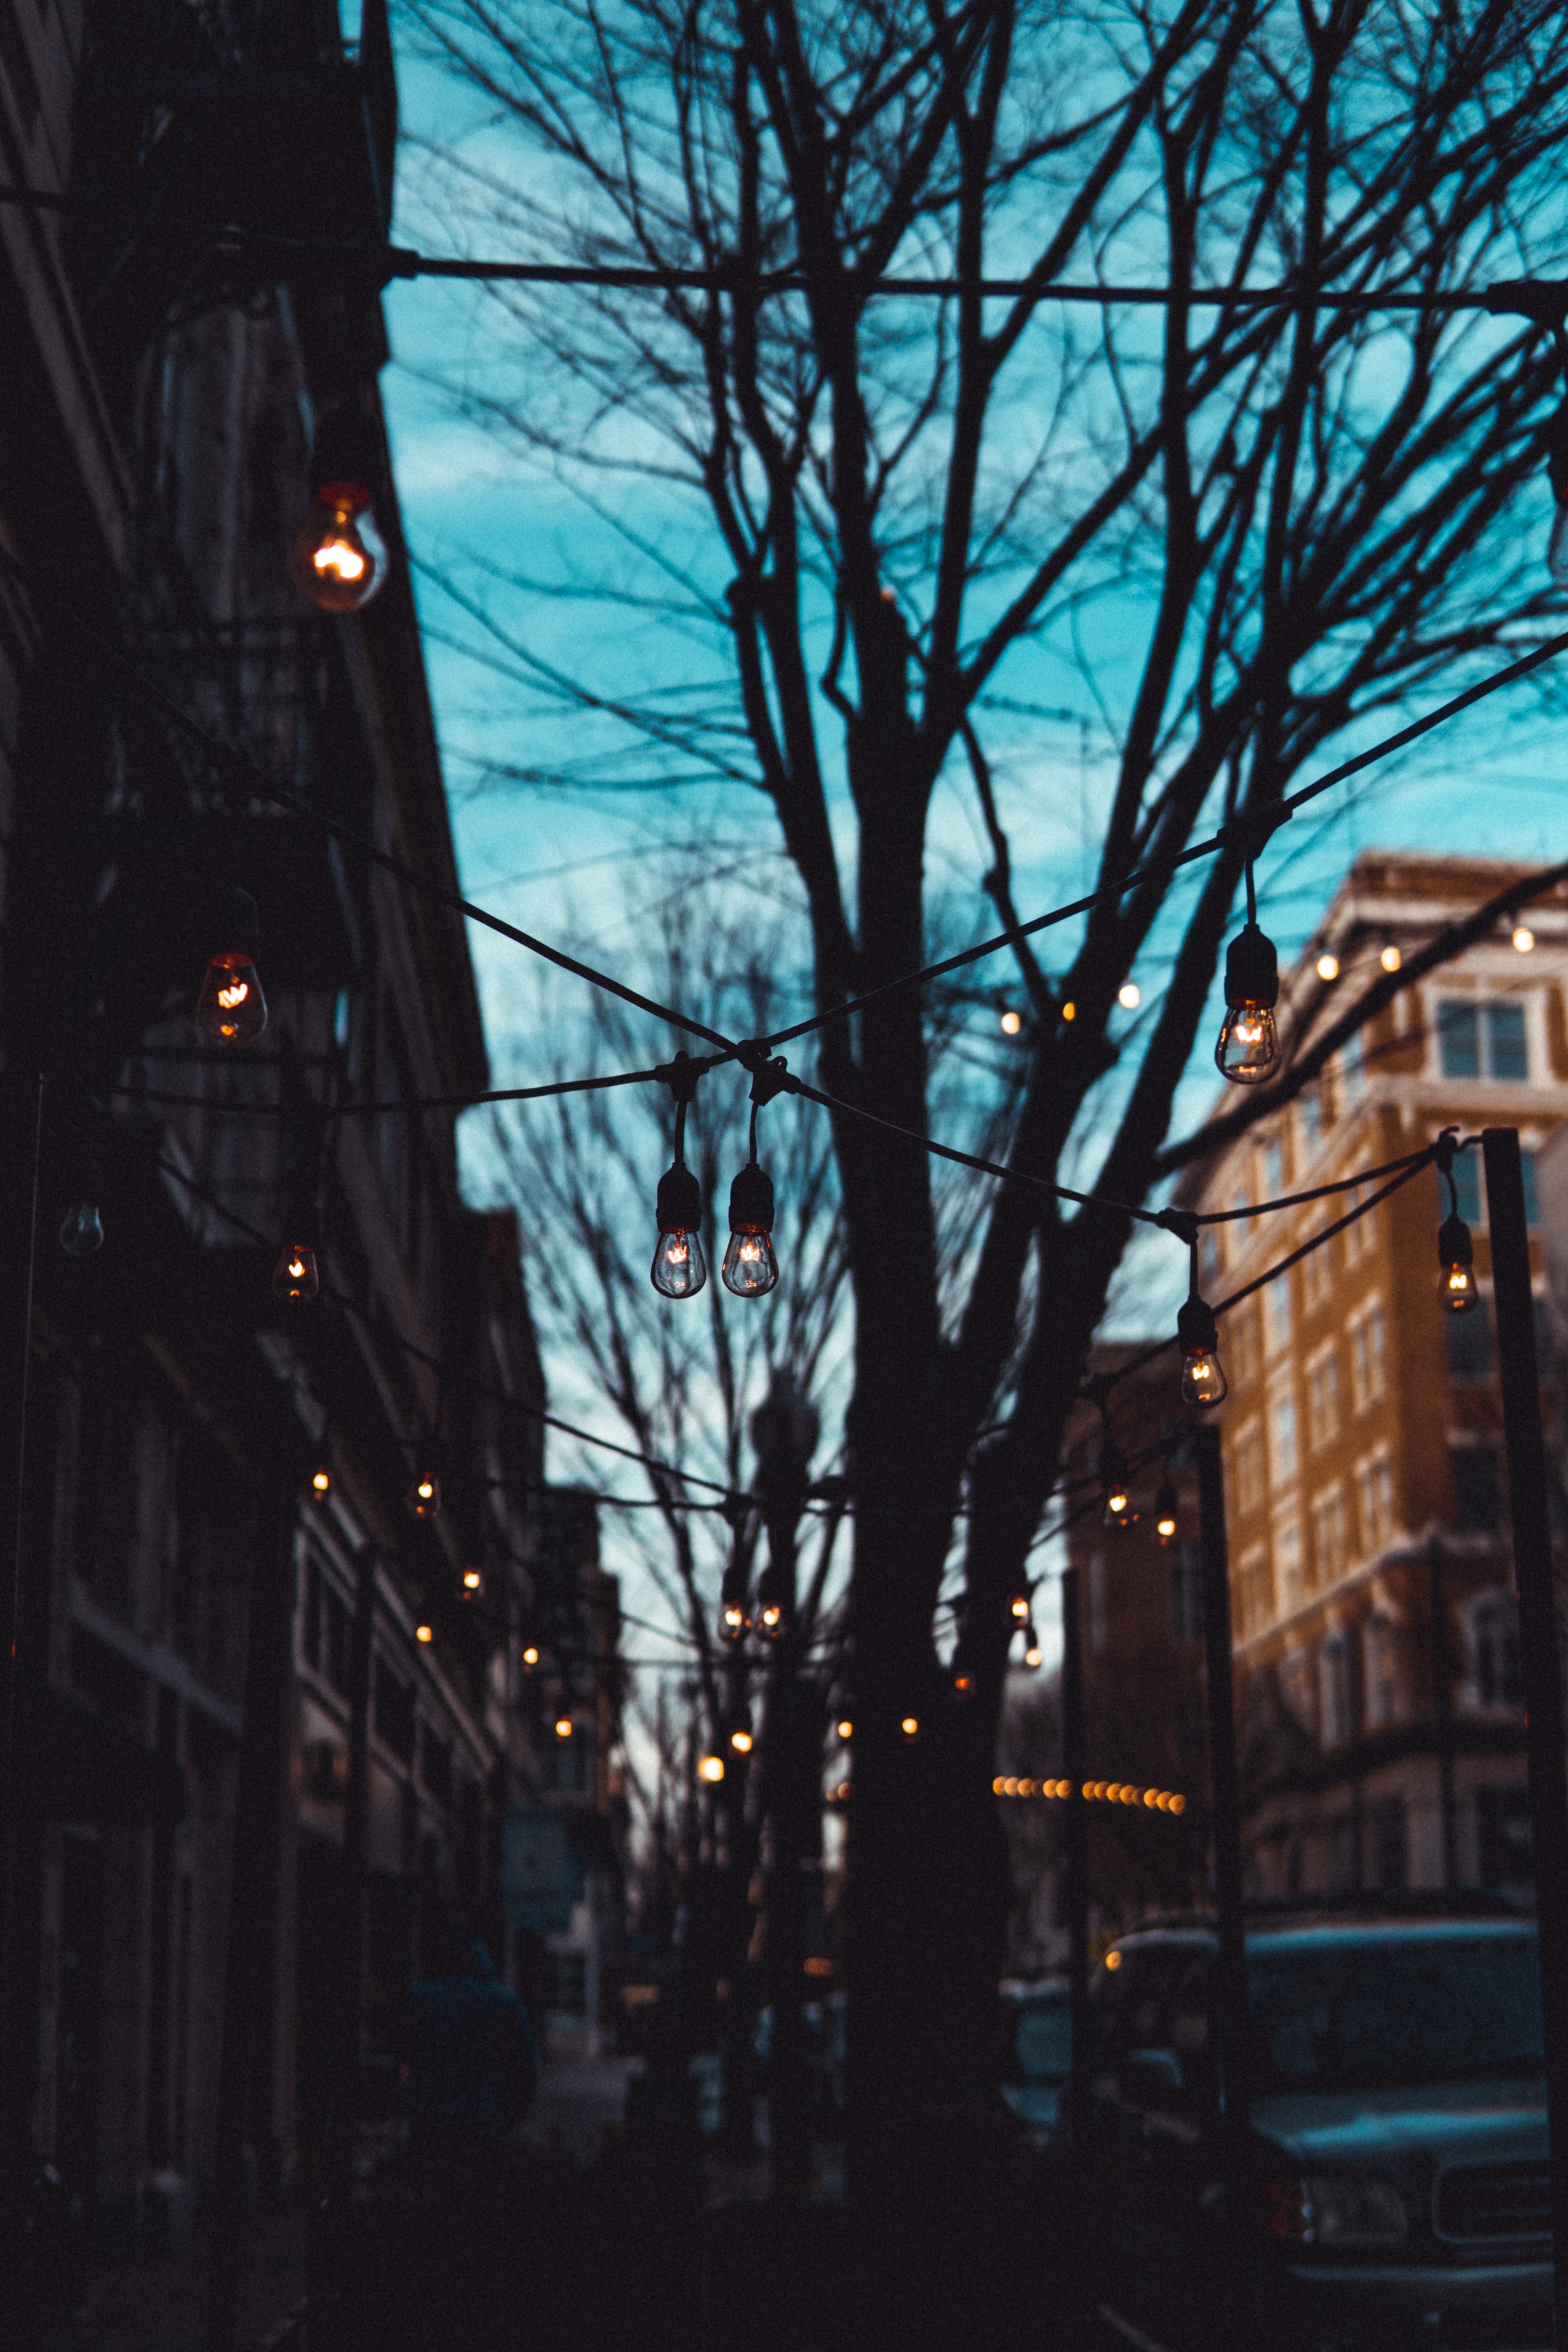 lamp, cities, trees, evening, street, lamps